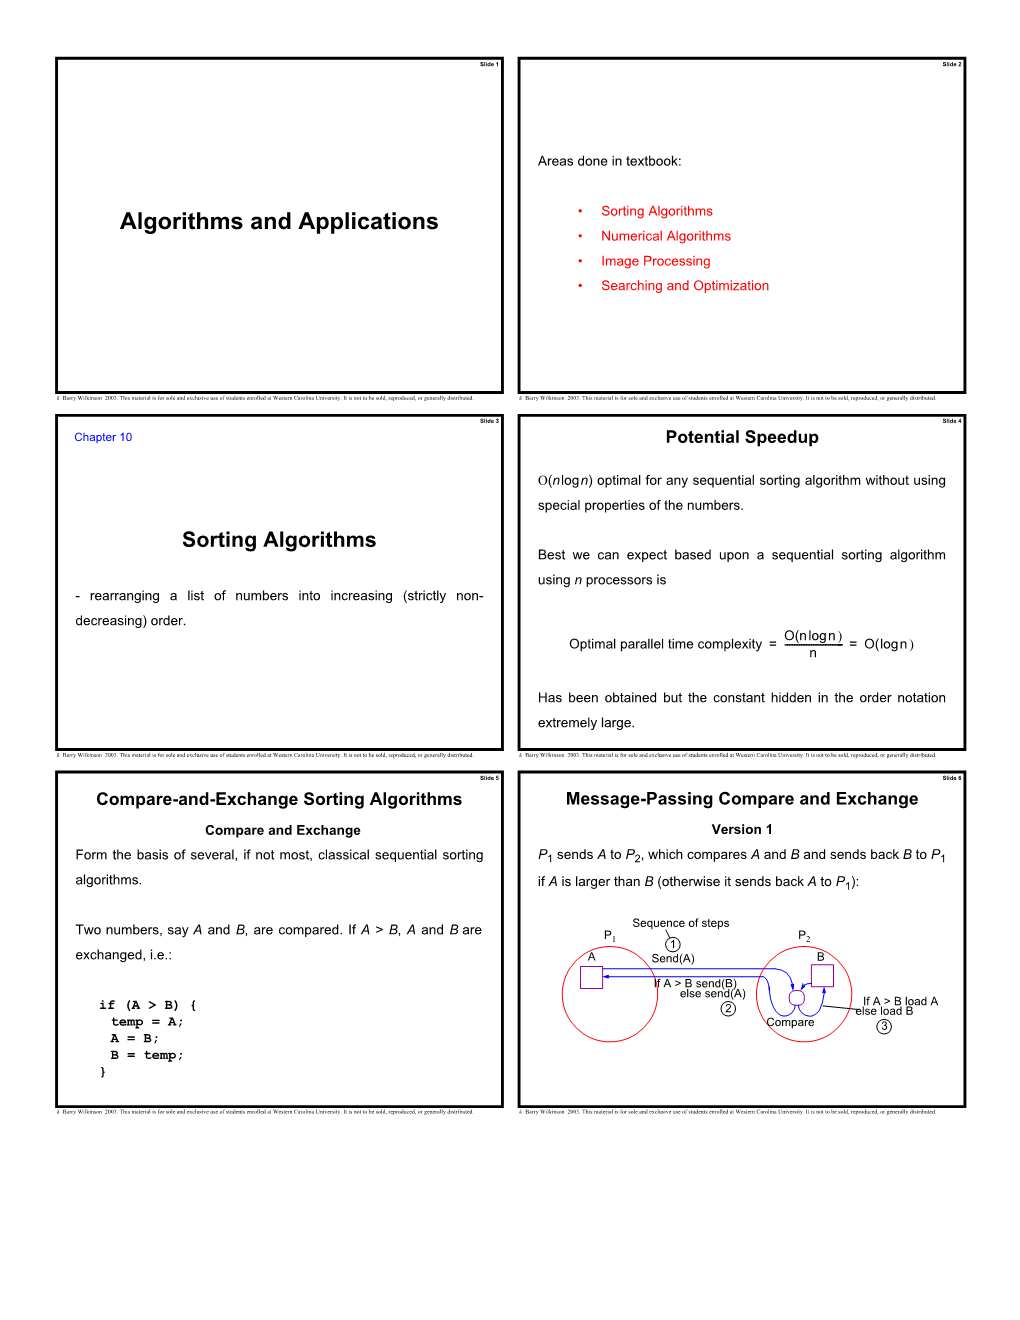 Algorithms and Applications • Sorting Algorithms • Numerical Algorithms • Image Processing • Searching and Optimization